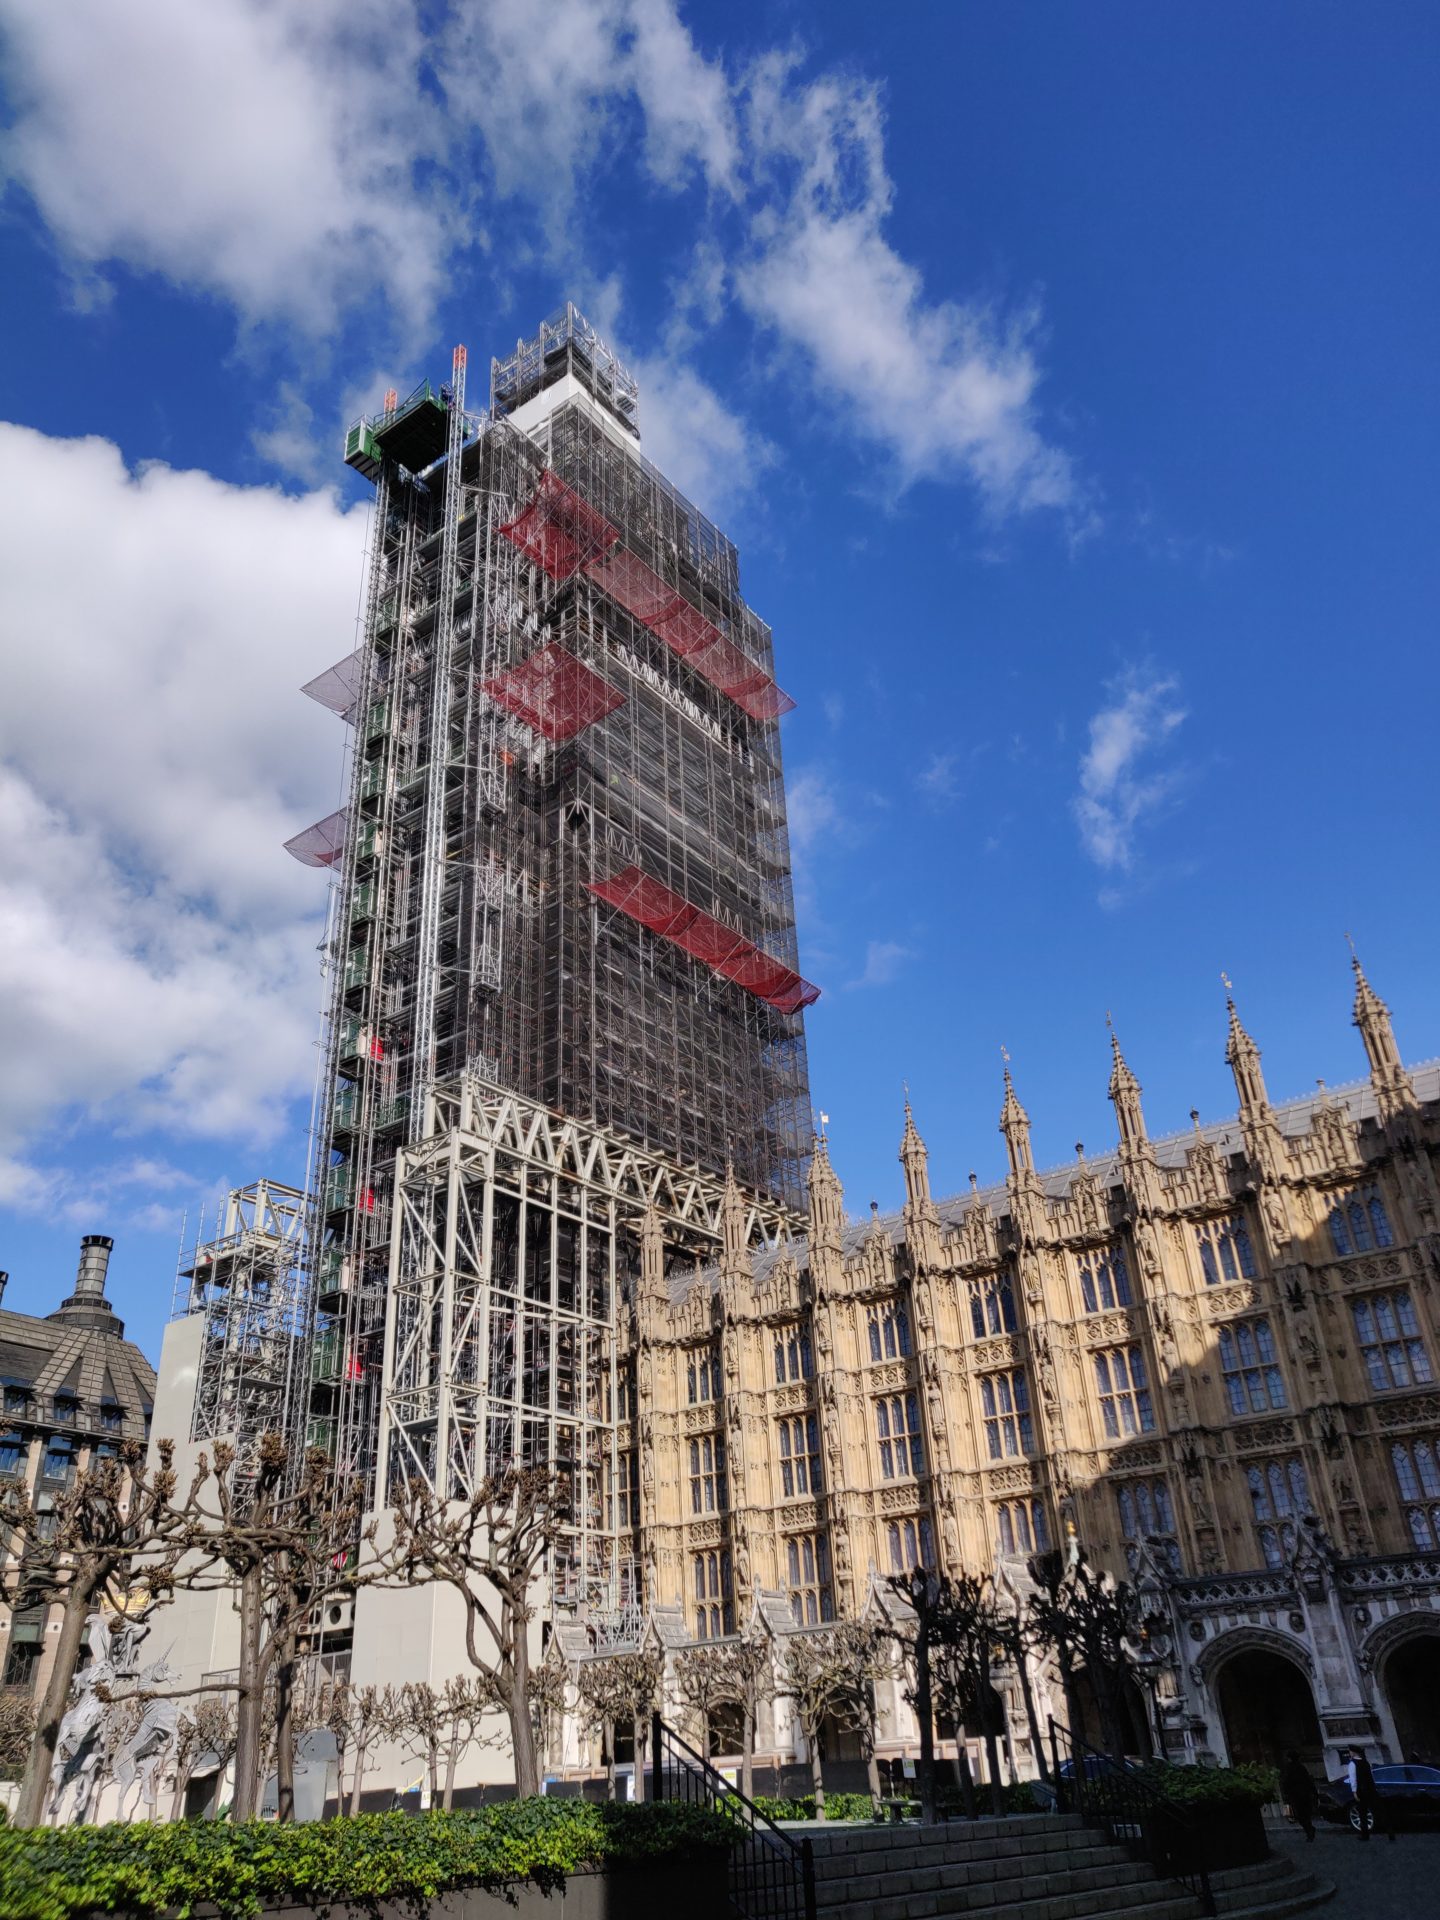 The Palace of Westminster being repaired